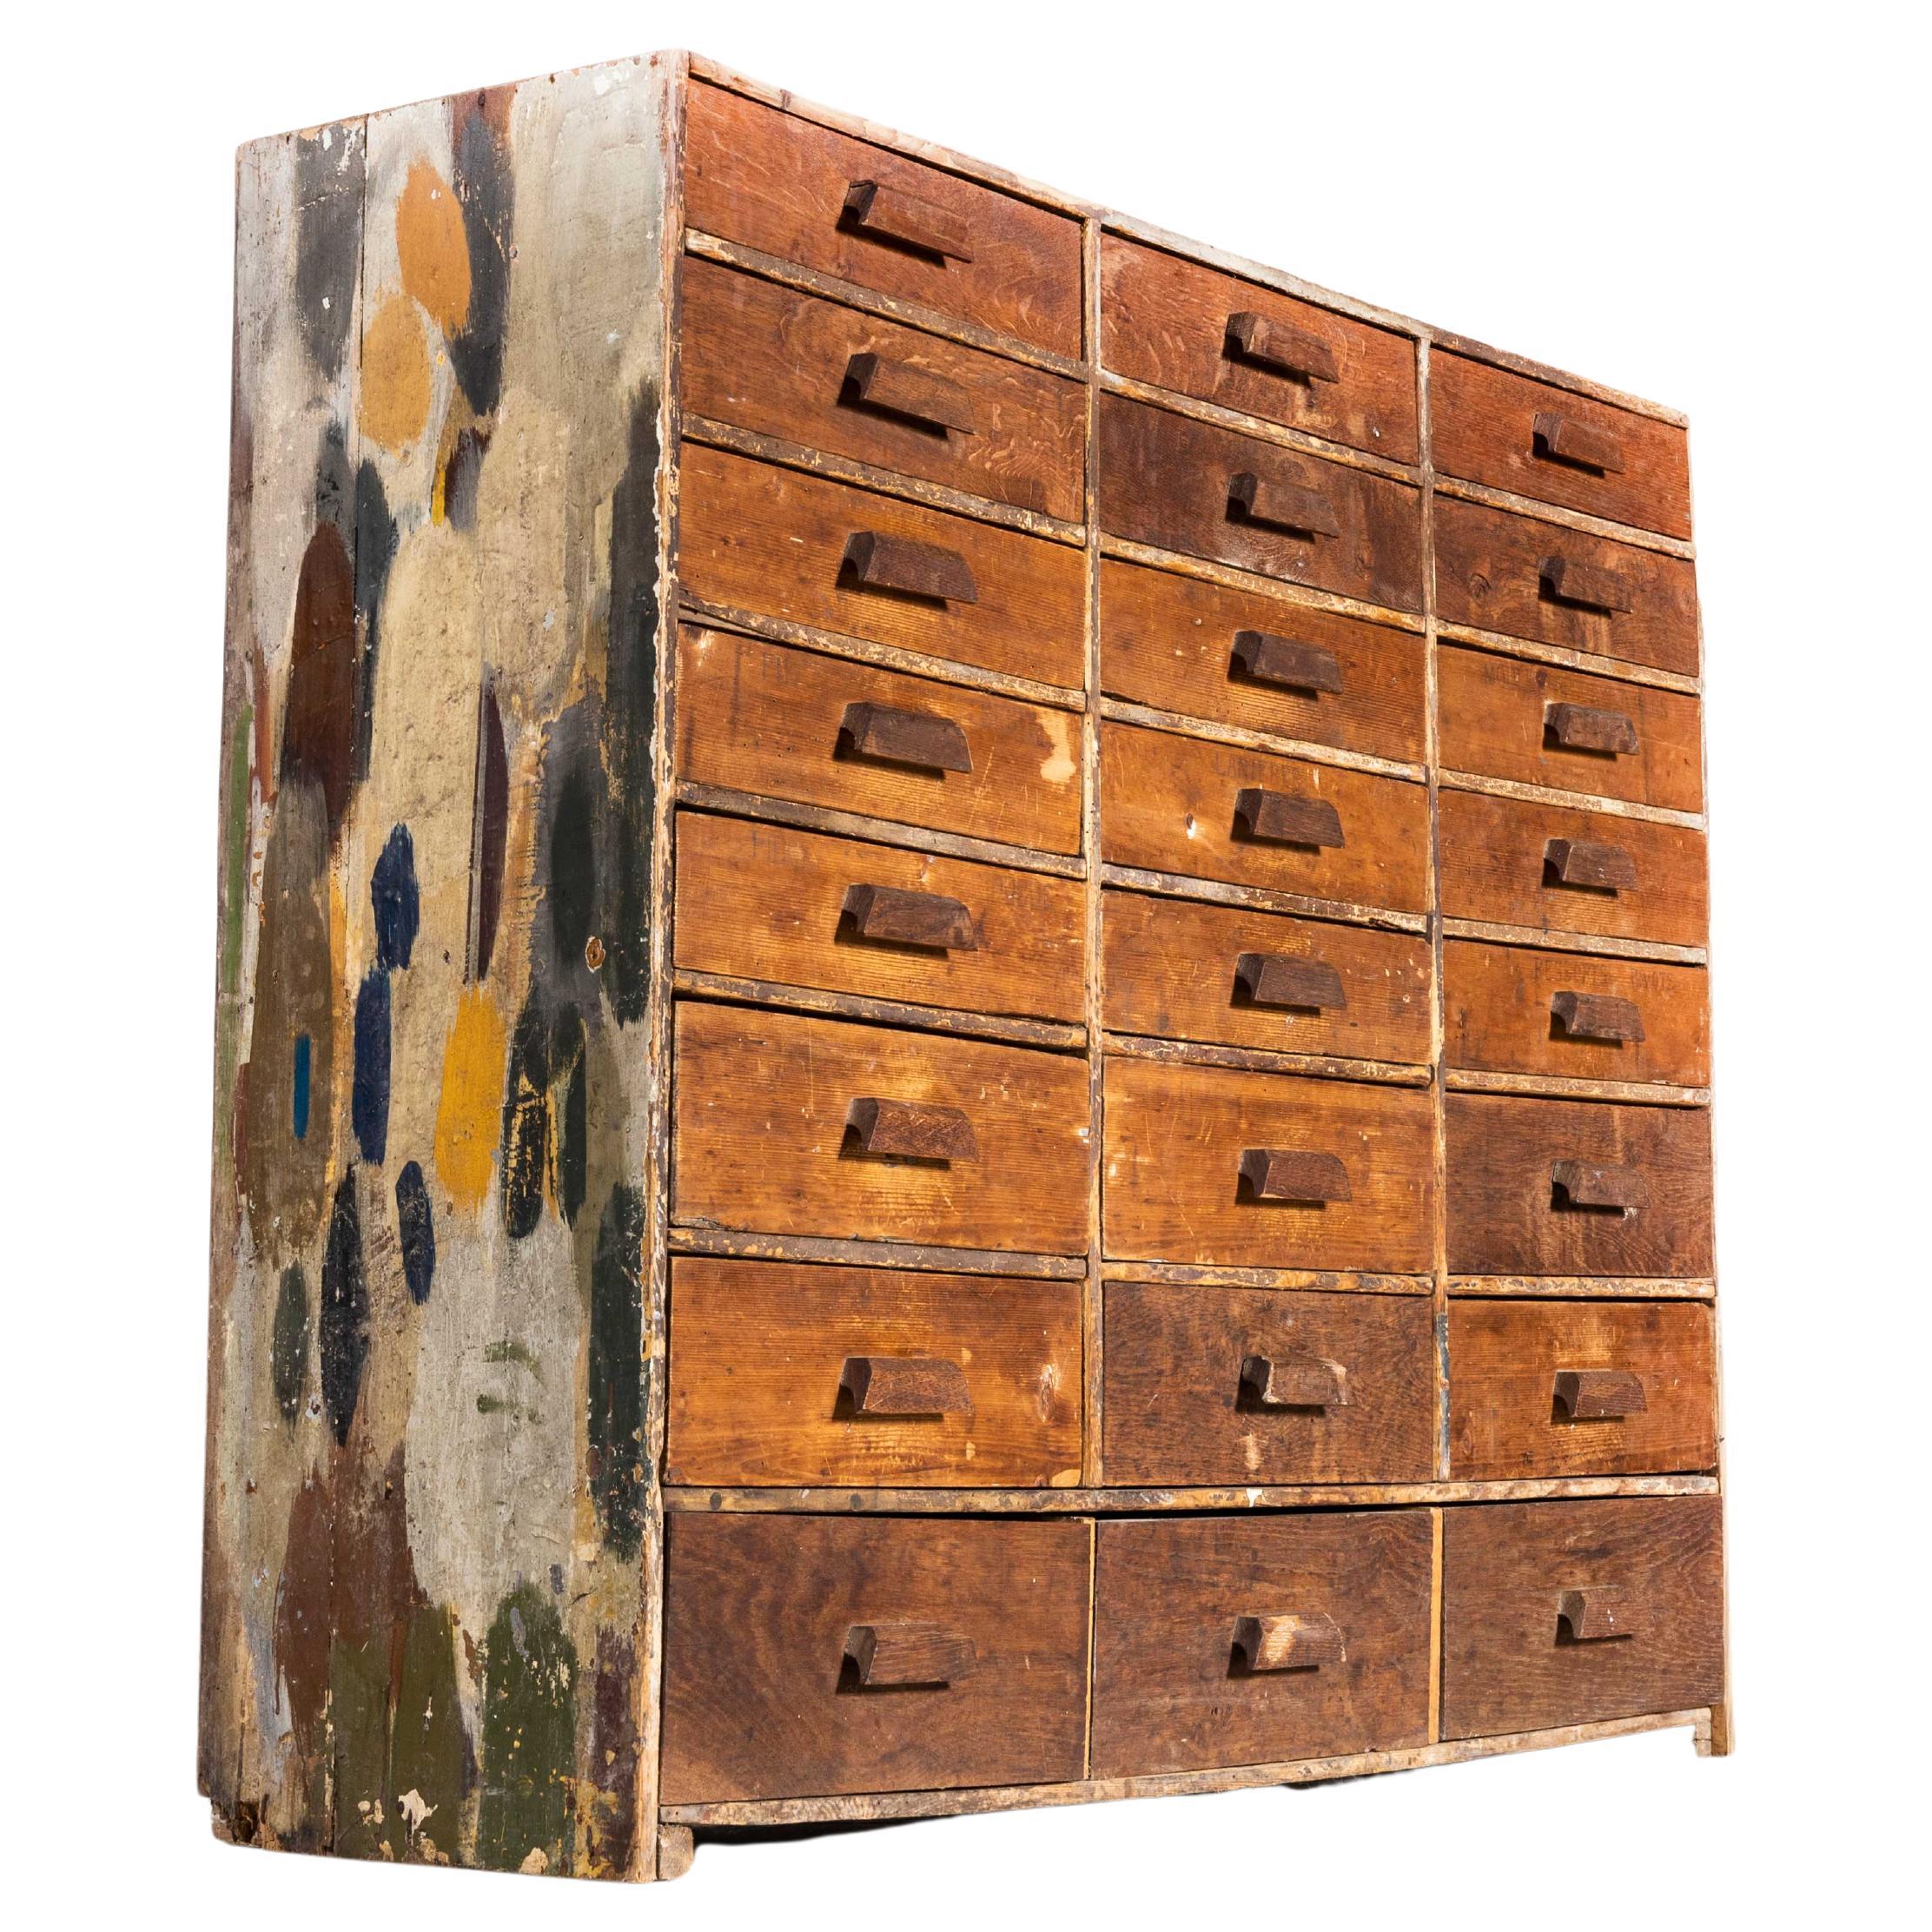 1950s French Bank of Workshop Drawers, Twenty Four Drawers For Sale